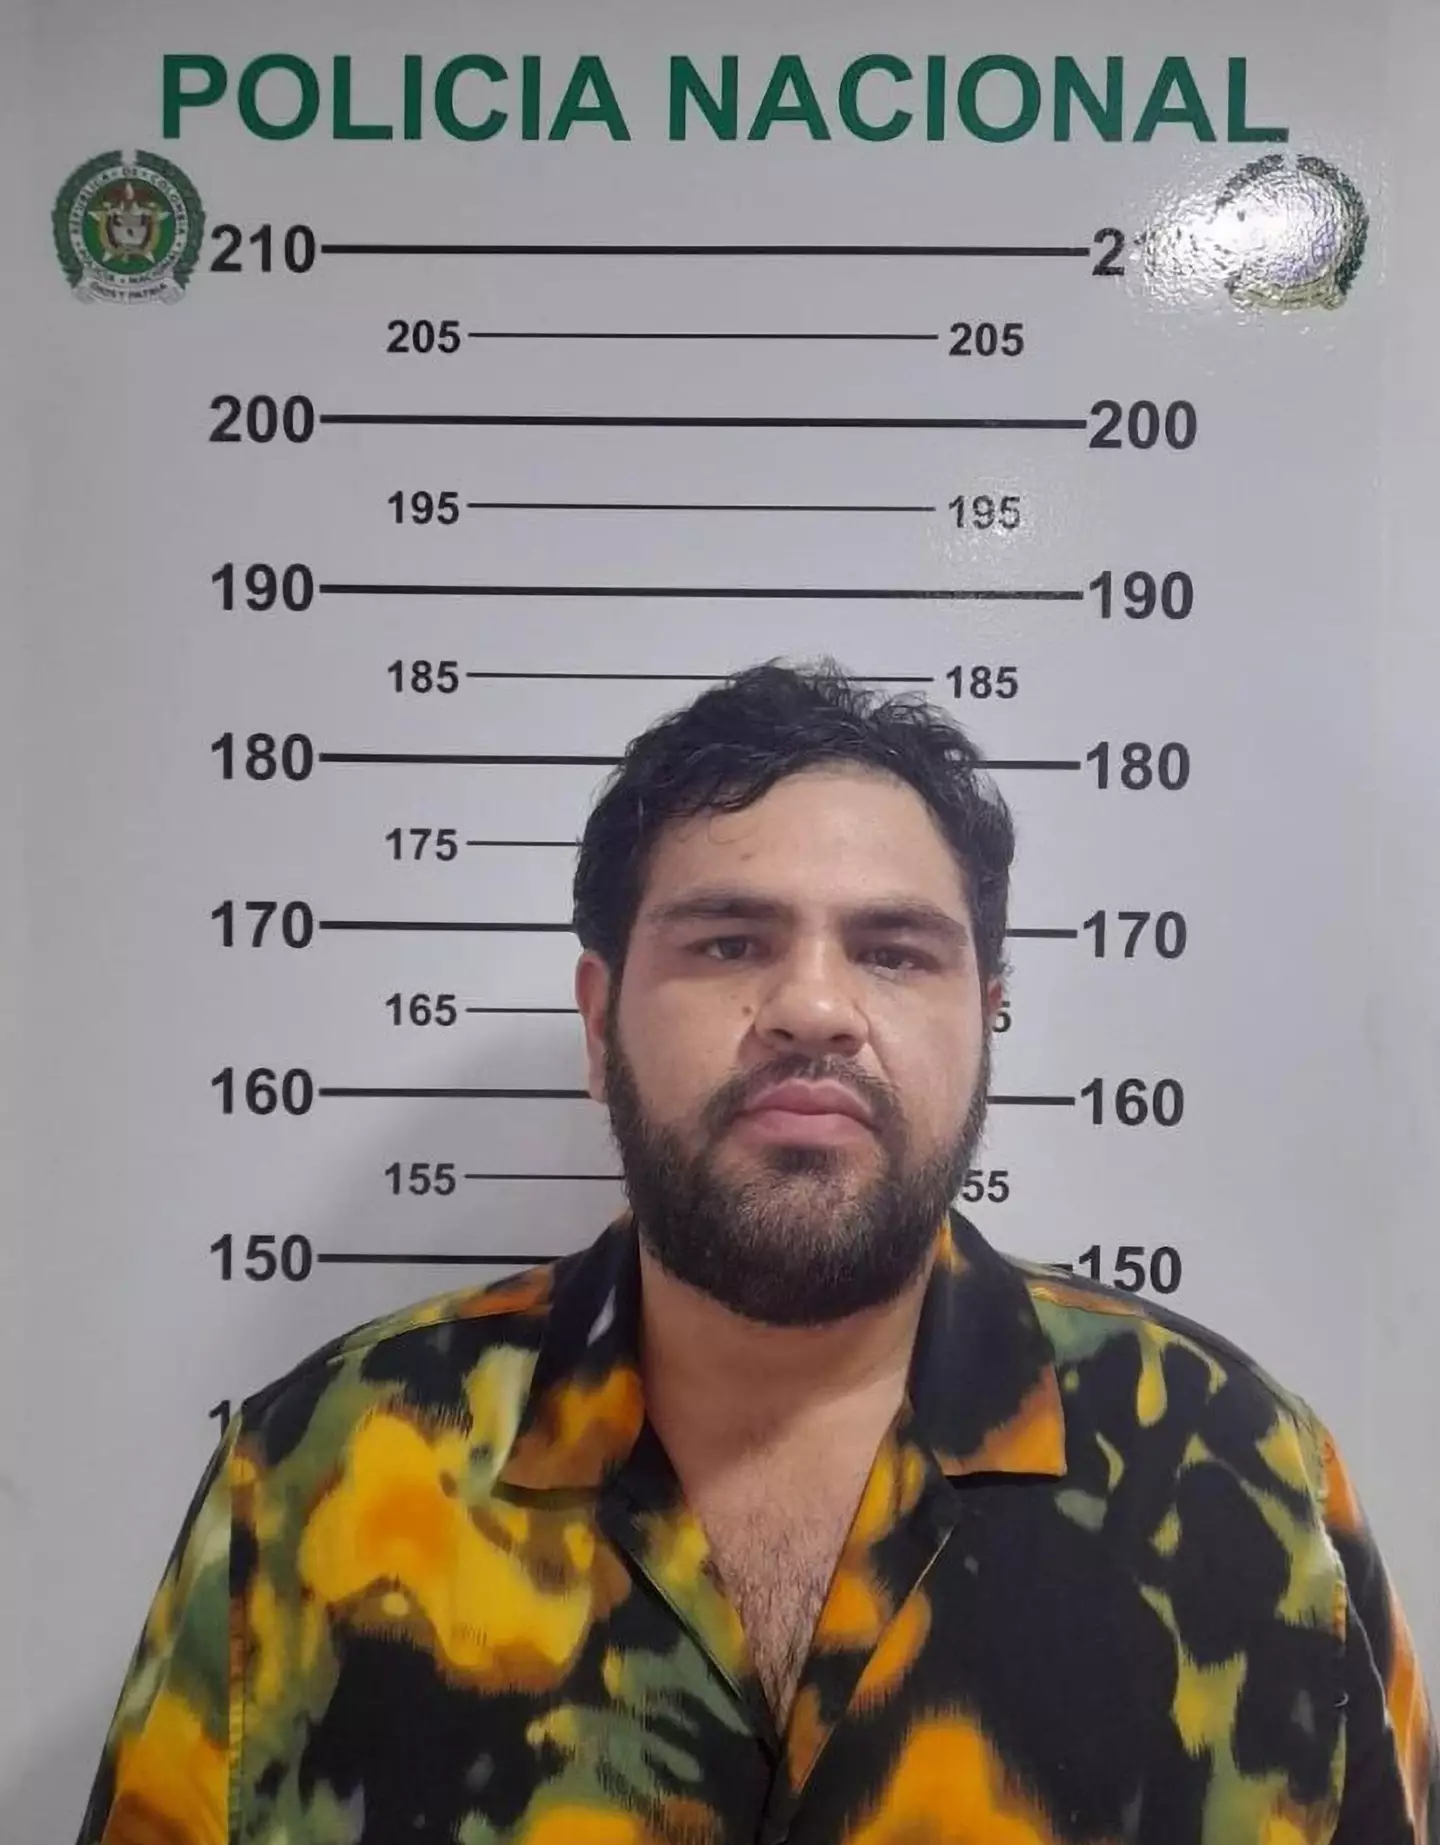 Sinaloa cartel member Brian Donaciano Olguin Berdugo was apprehended after a model he was spending time with uploaded an image of them kissing onto social media.